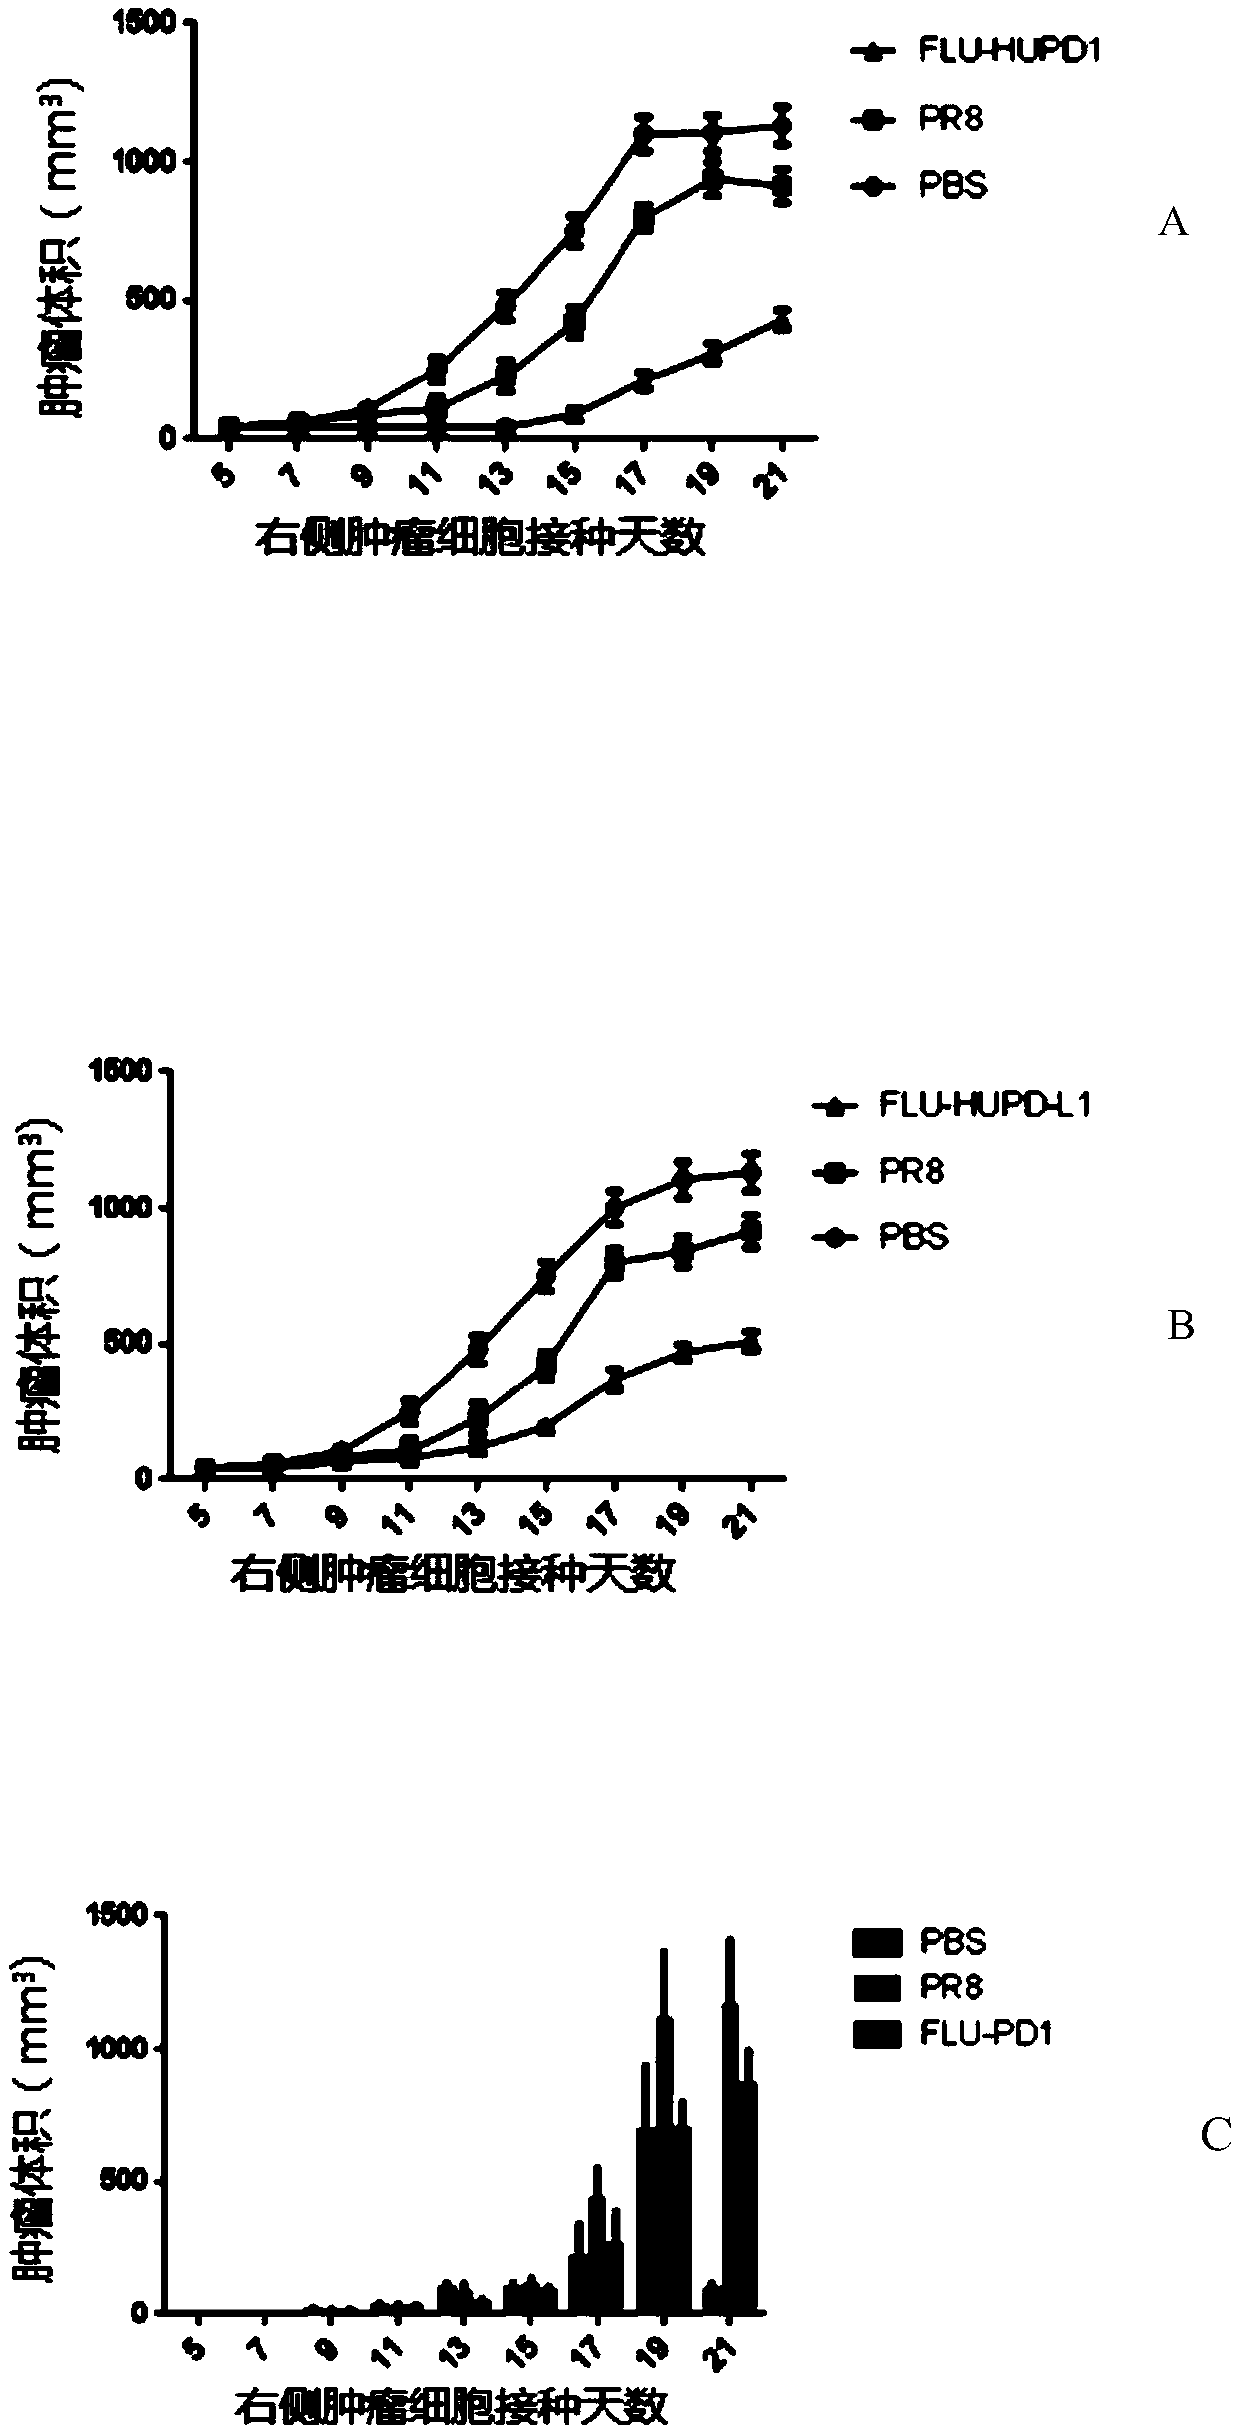 Recombinant influenza virus rescue method and application of the same in tumor therapy